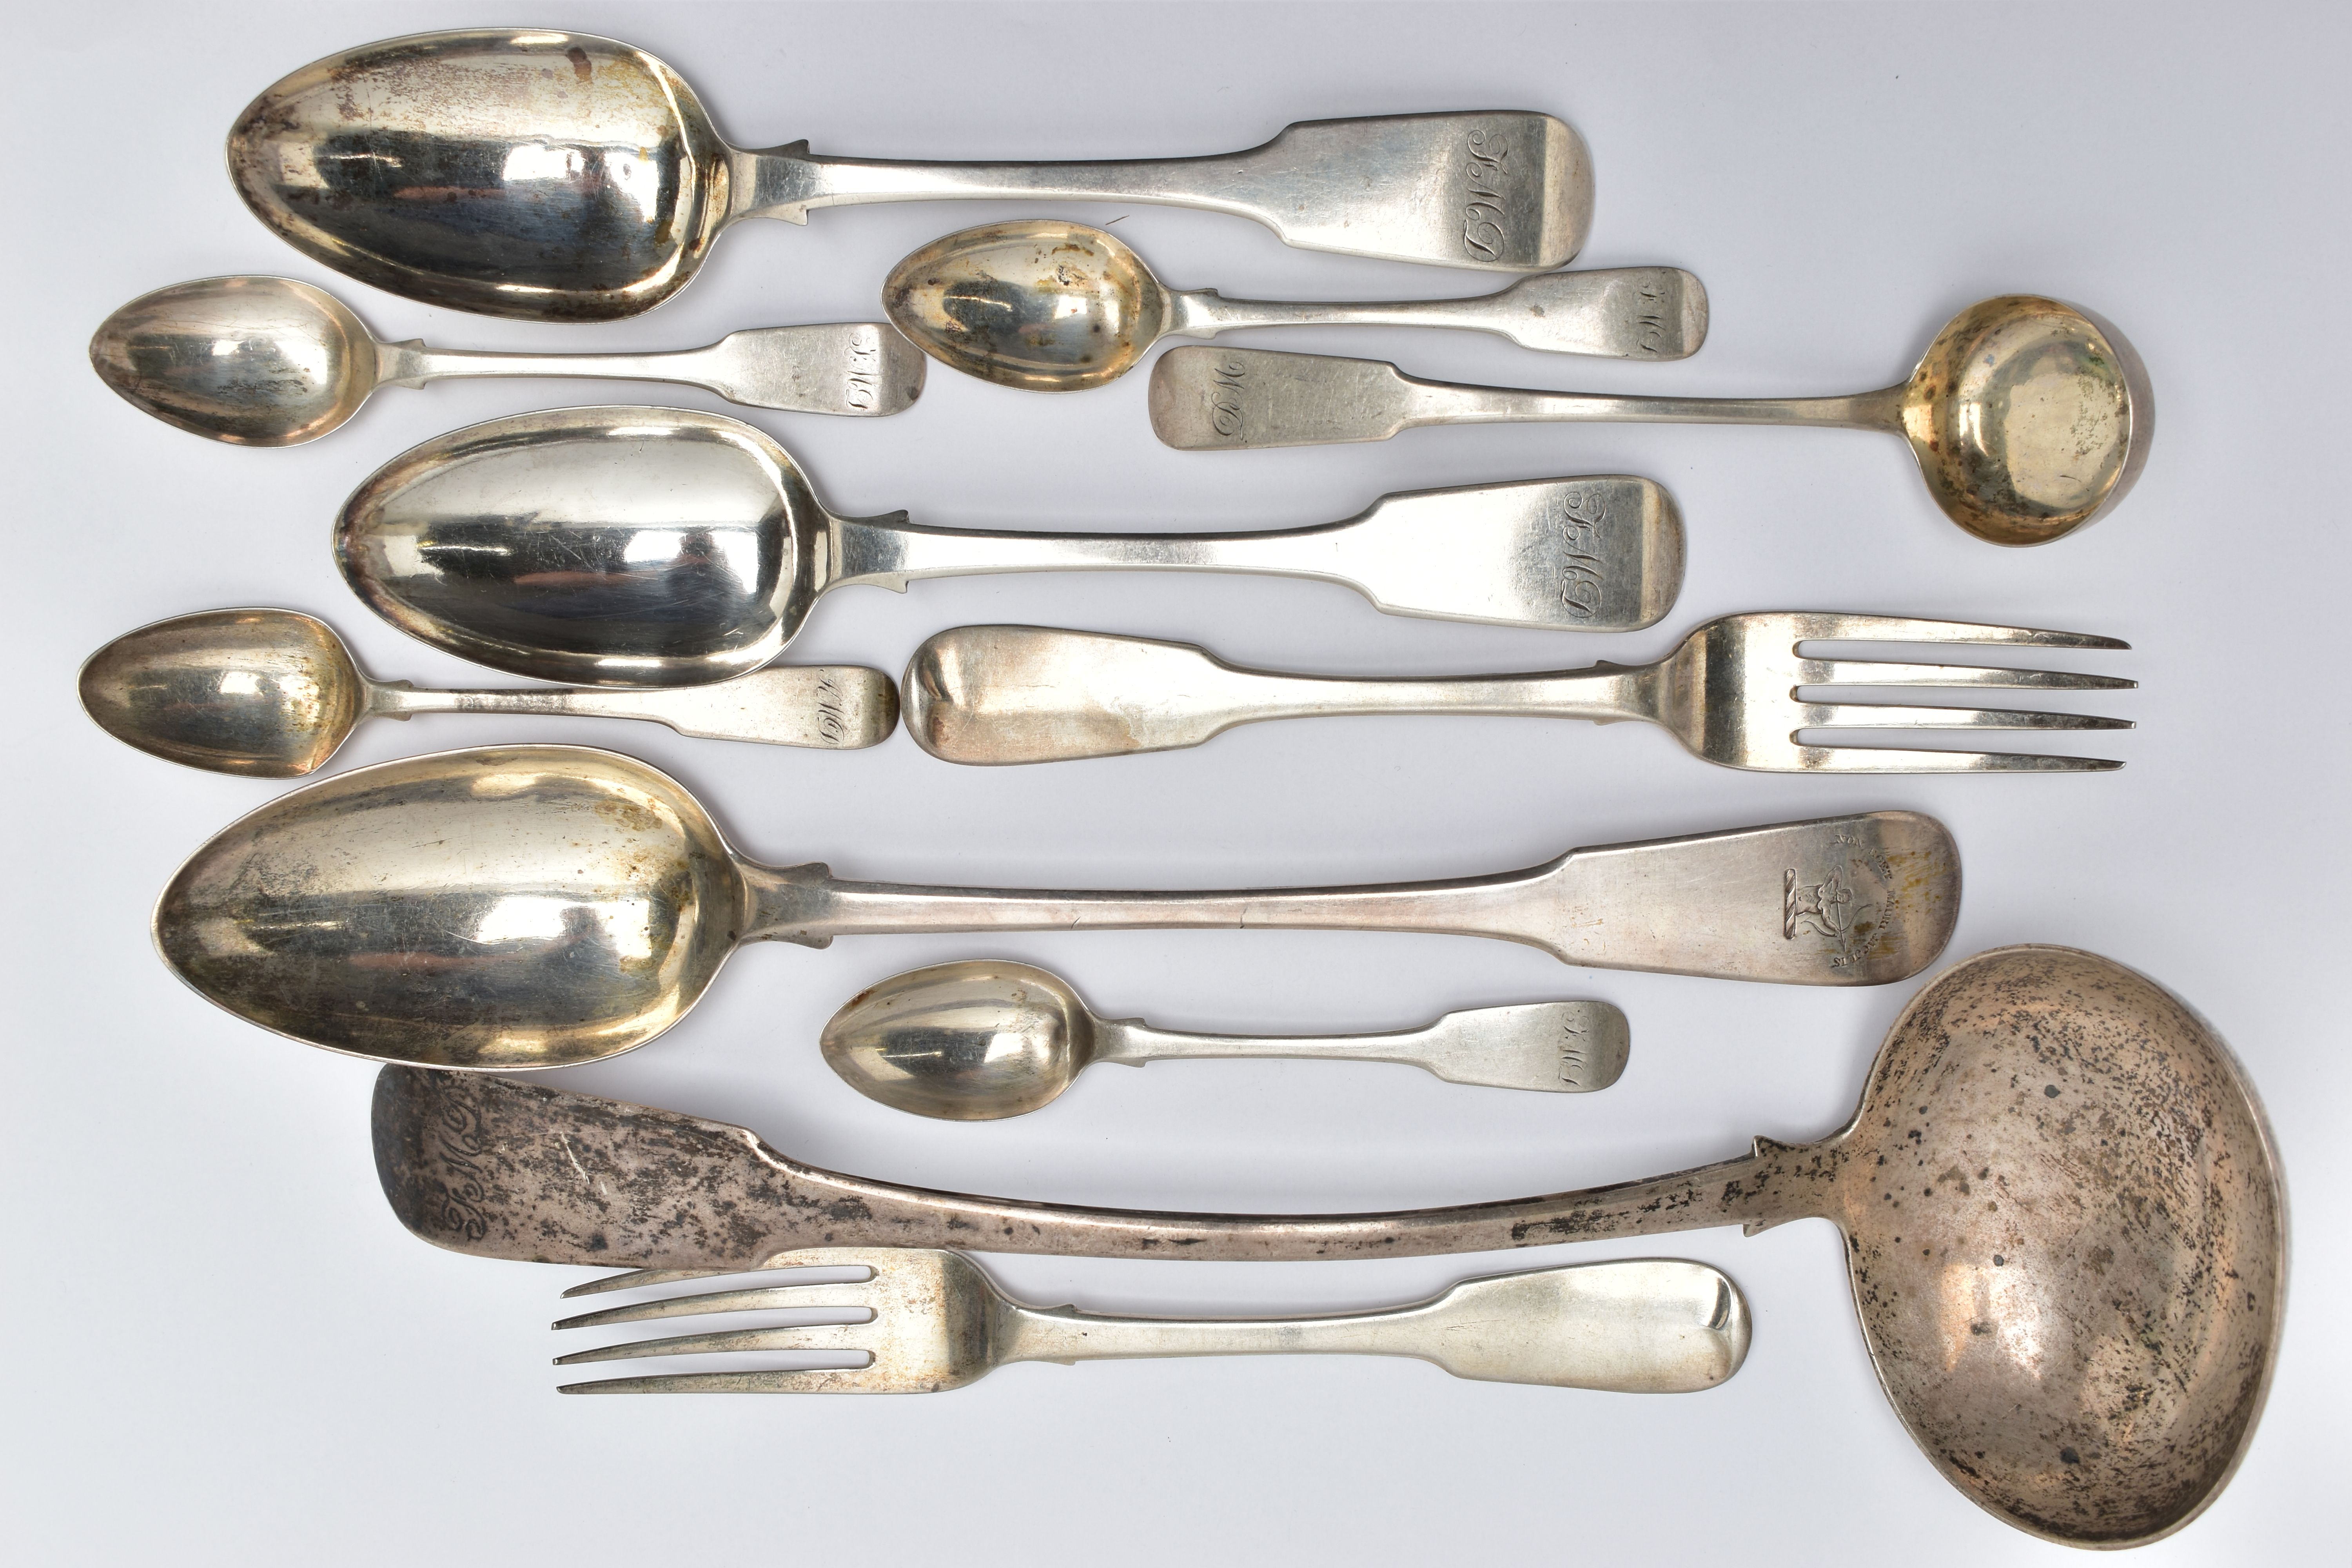 ELEVEN PIECES OF 19TH CENTURY SCOTTISH SILVER FLATWARE, comprising a soup ladle, two tablespoon